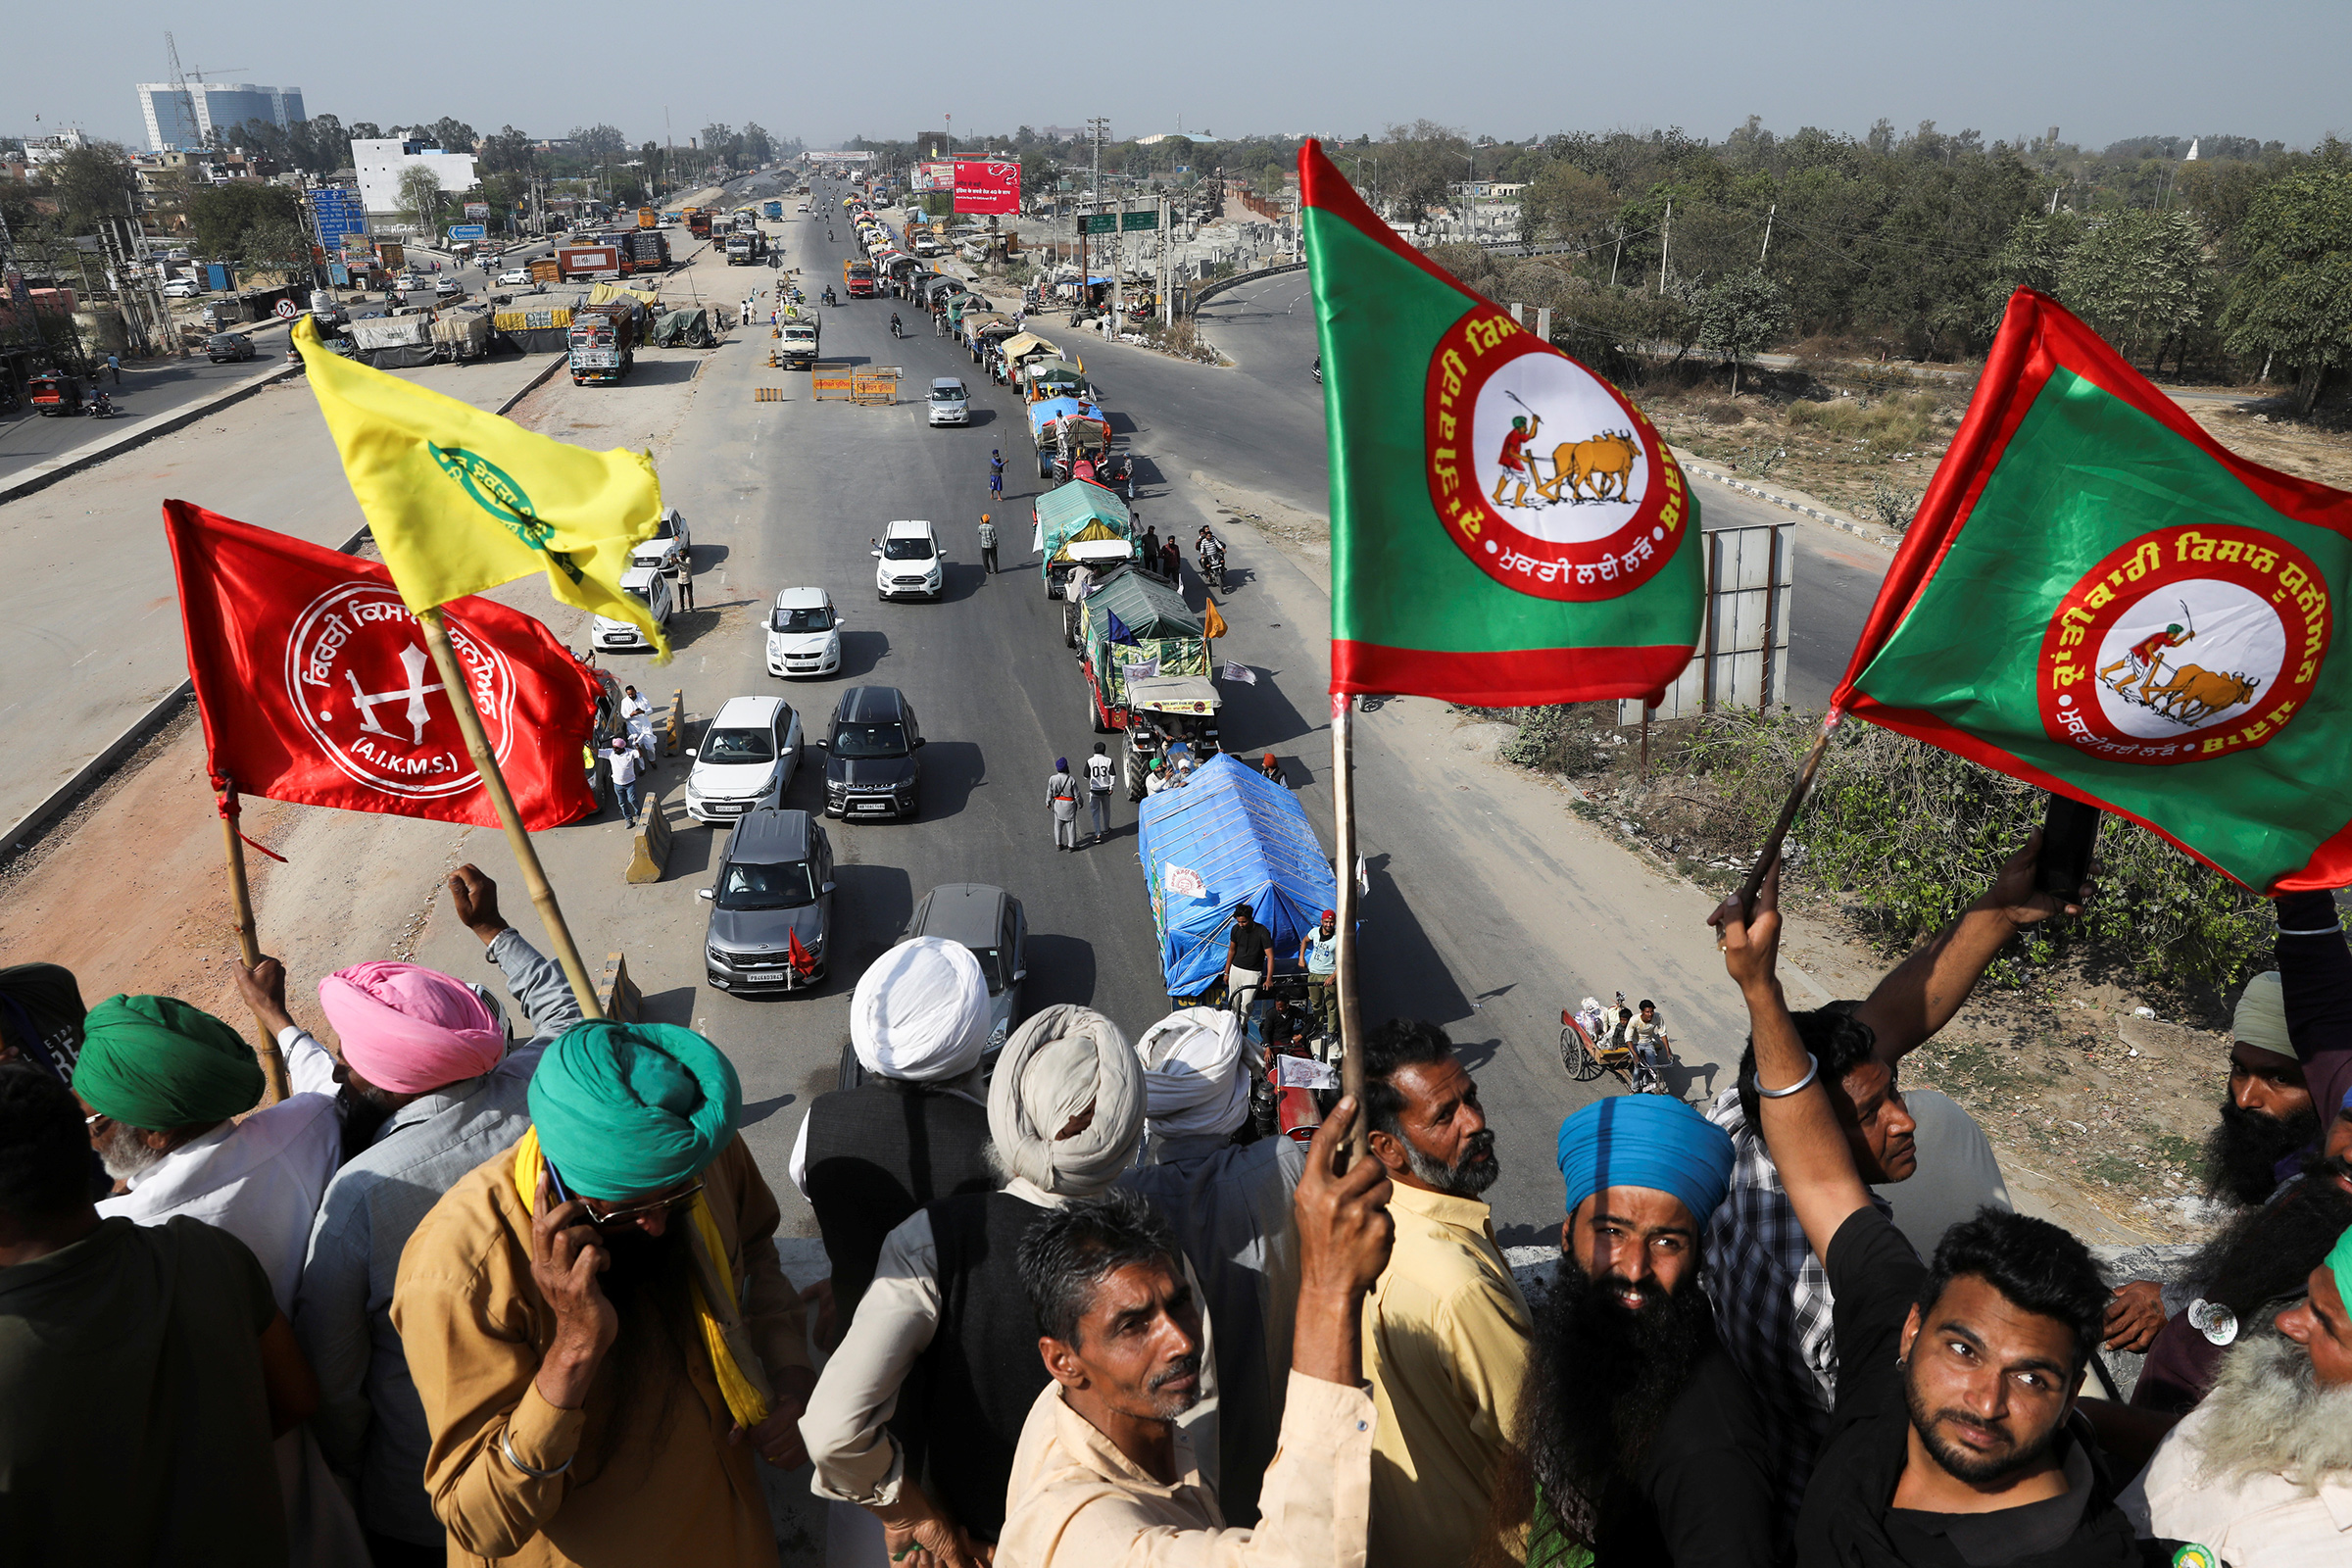 Farmers cheer and wave flags near Kundli border in Haryana, India, as more tractors arrive from Punjab to participate in the ongoing farmers' protest at Singhu border to mark the 100th day of demonstrations against the farm laws on March 6